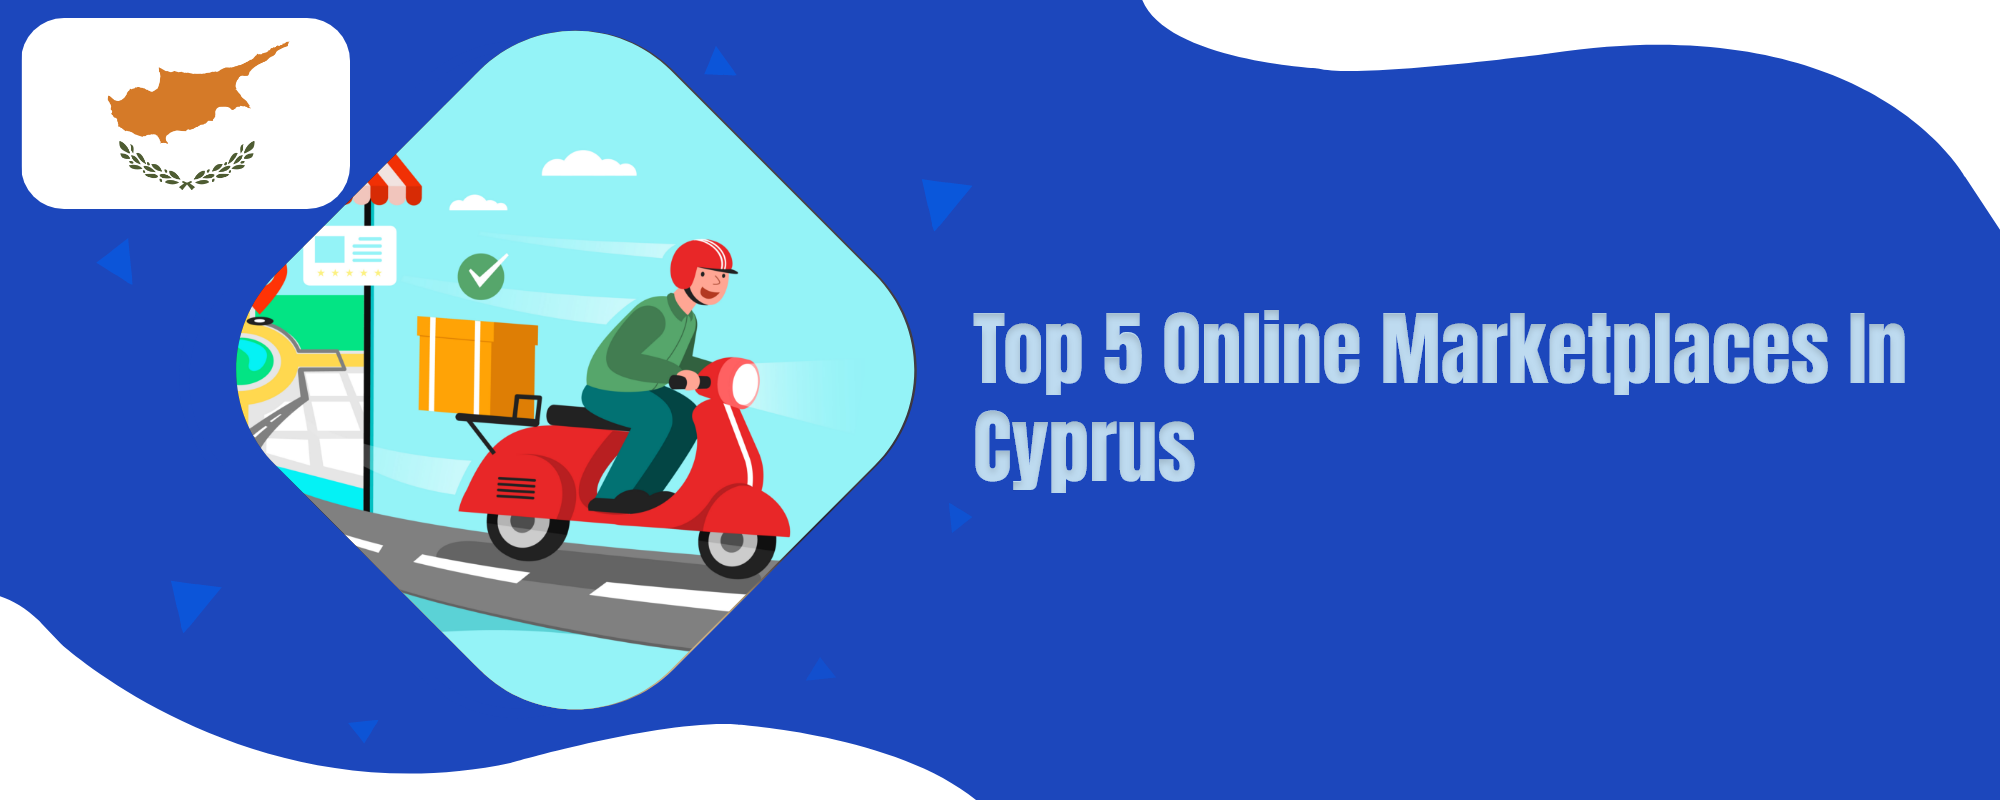 online marketplaces in cyprus